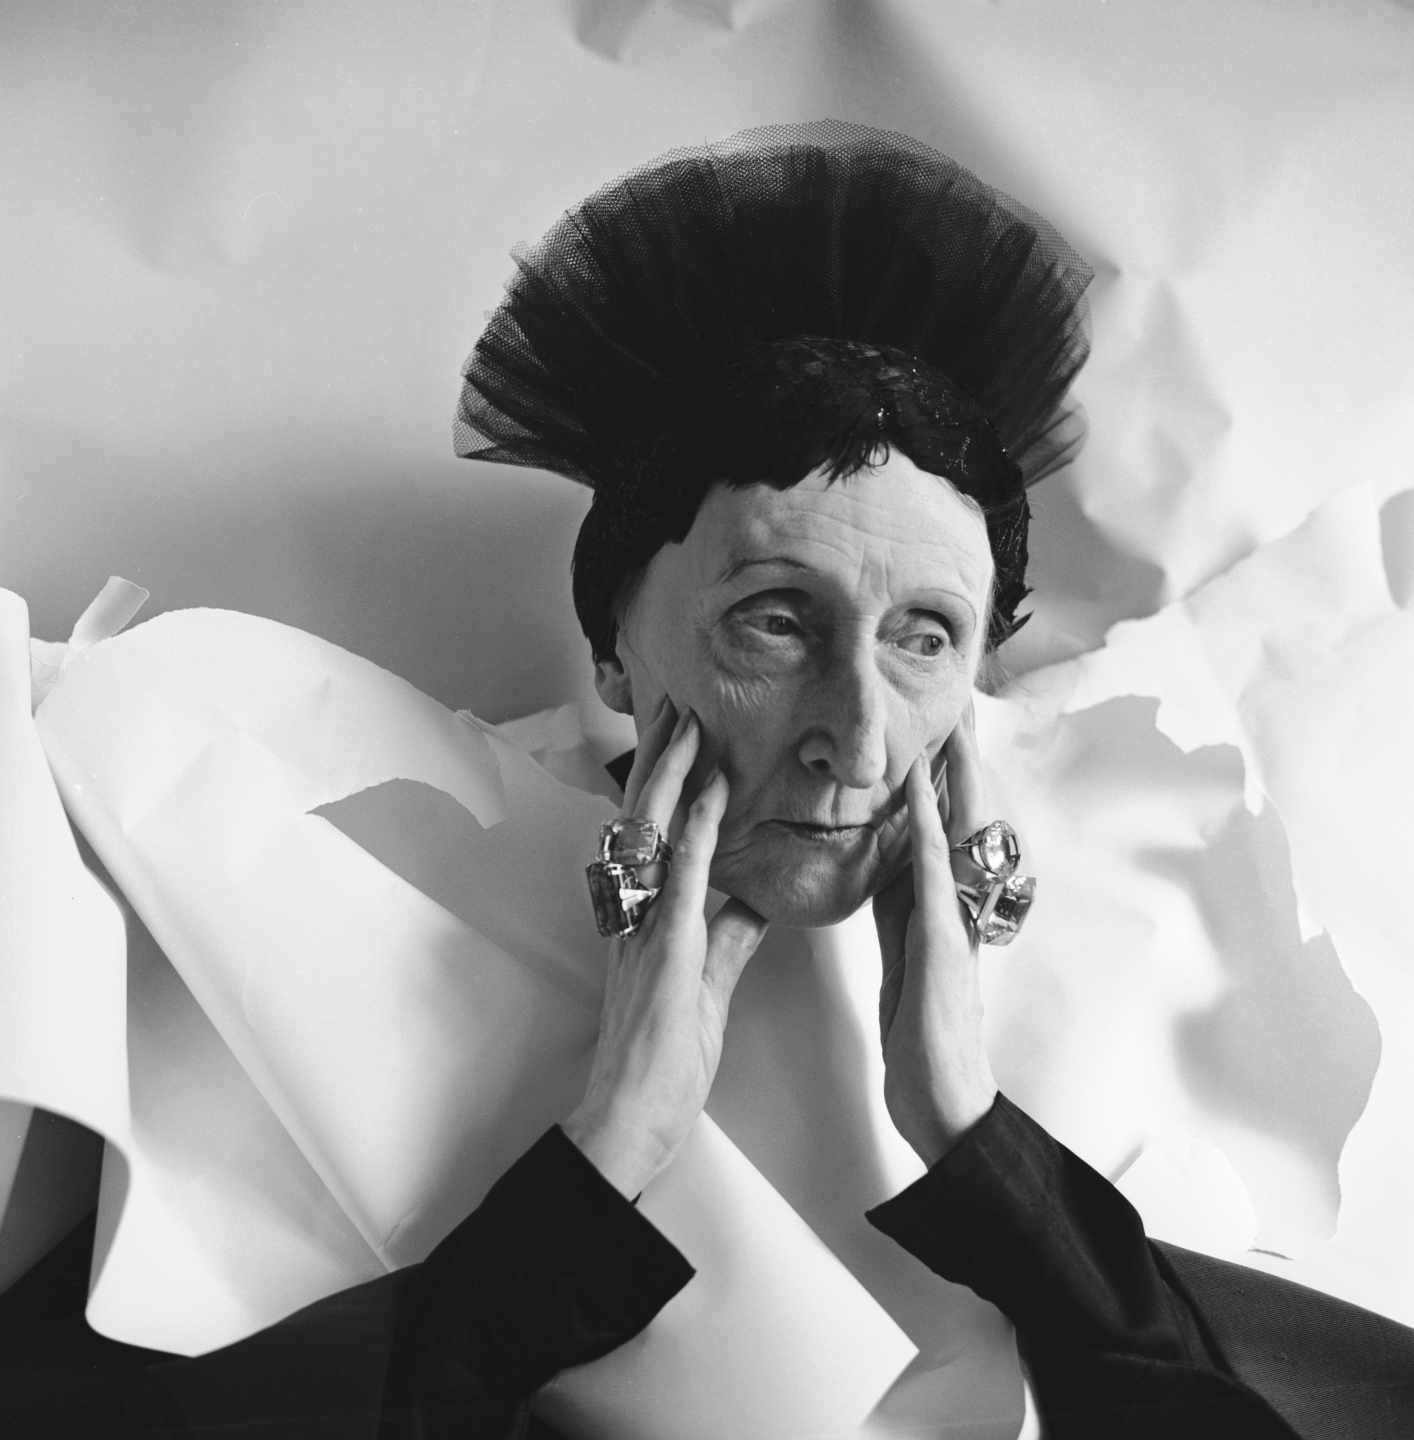 Edith Sitwell, 1962 ©The Cecil Beaton Studio Archive at Sotheby’s